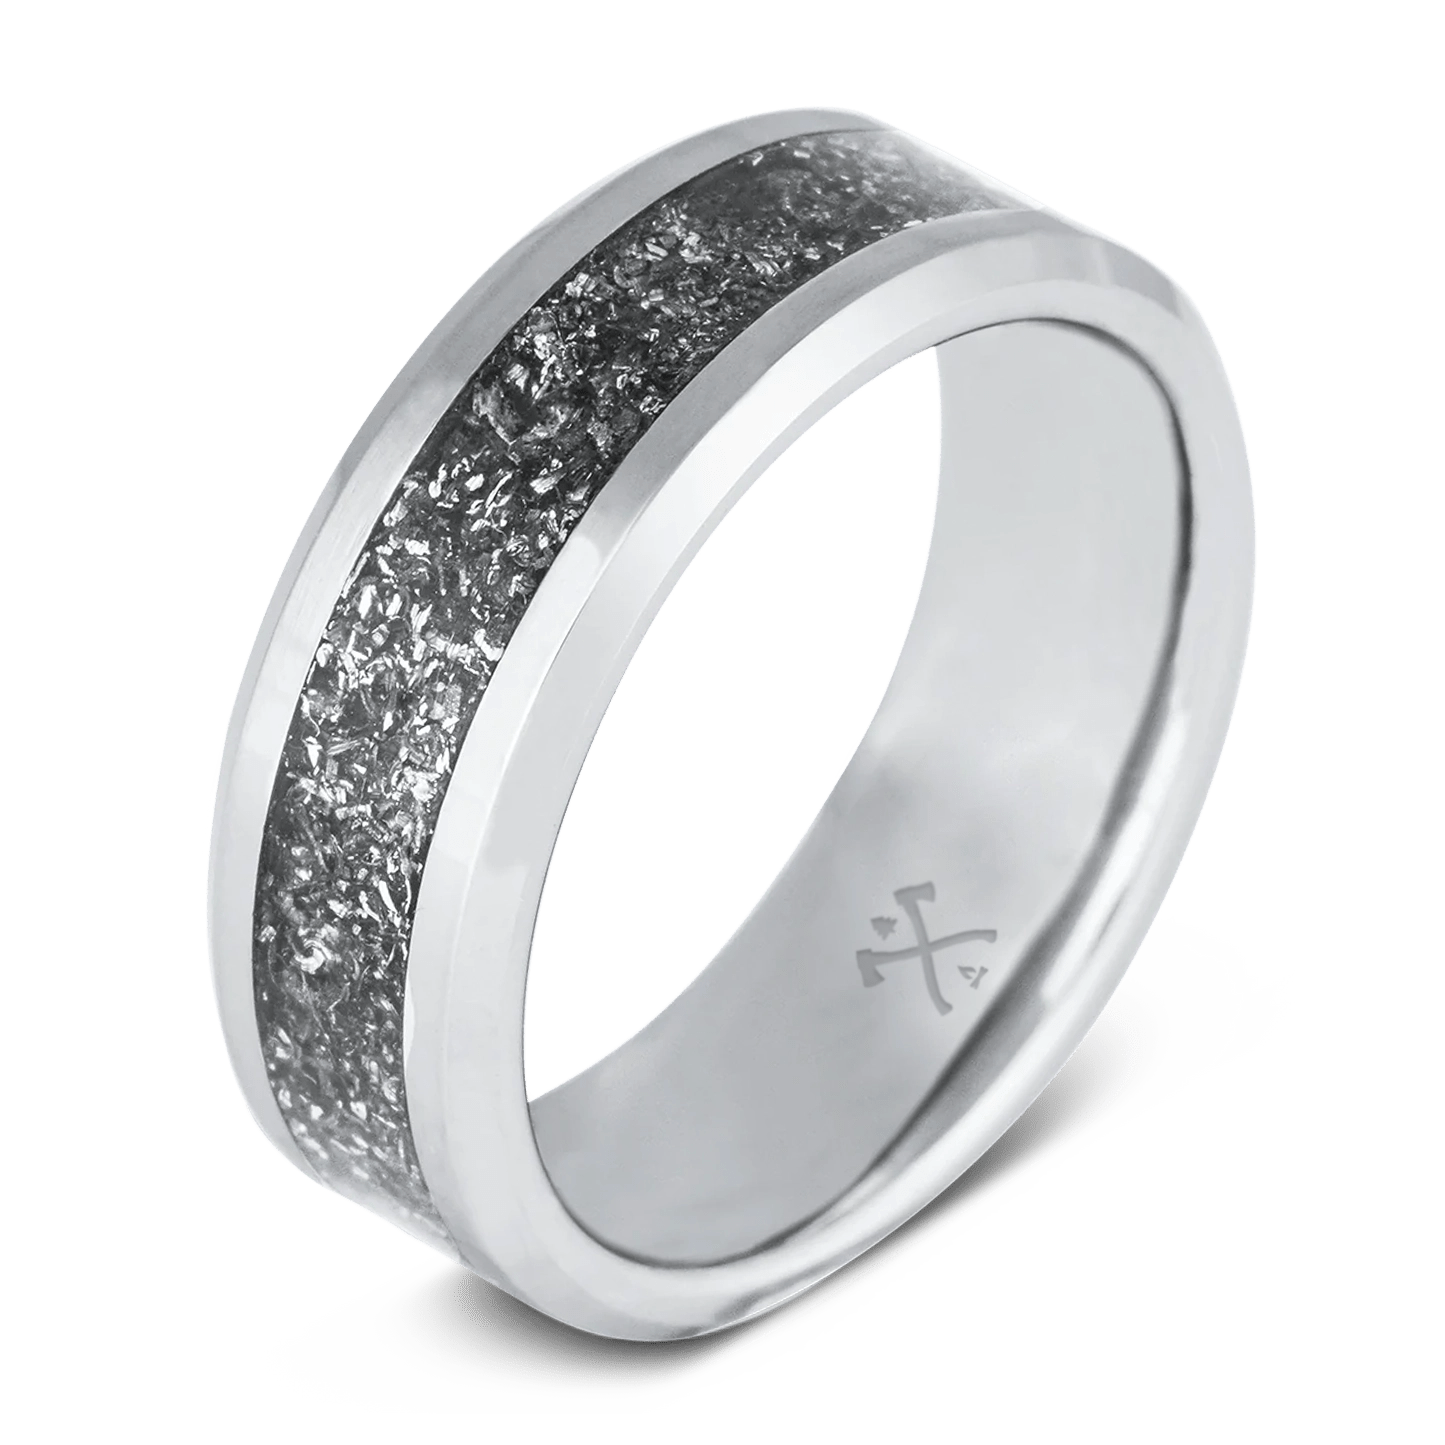 The Patton. Military ring made with tungsten and WWII Sherman tank metal